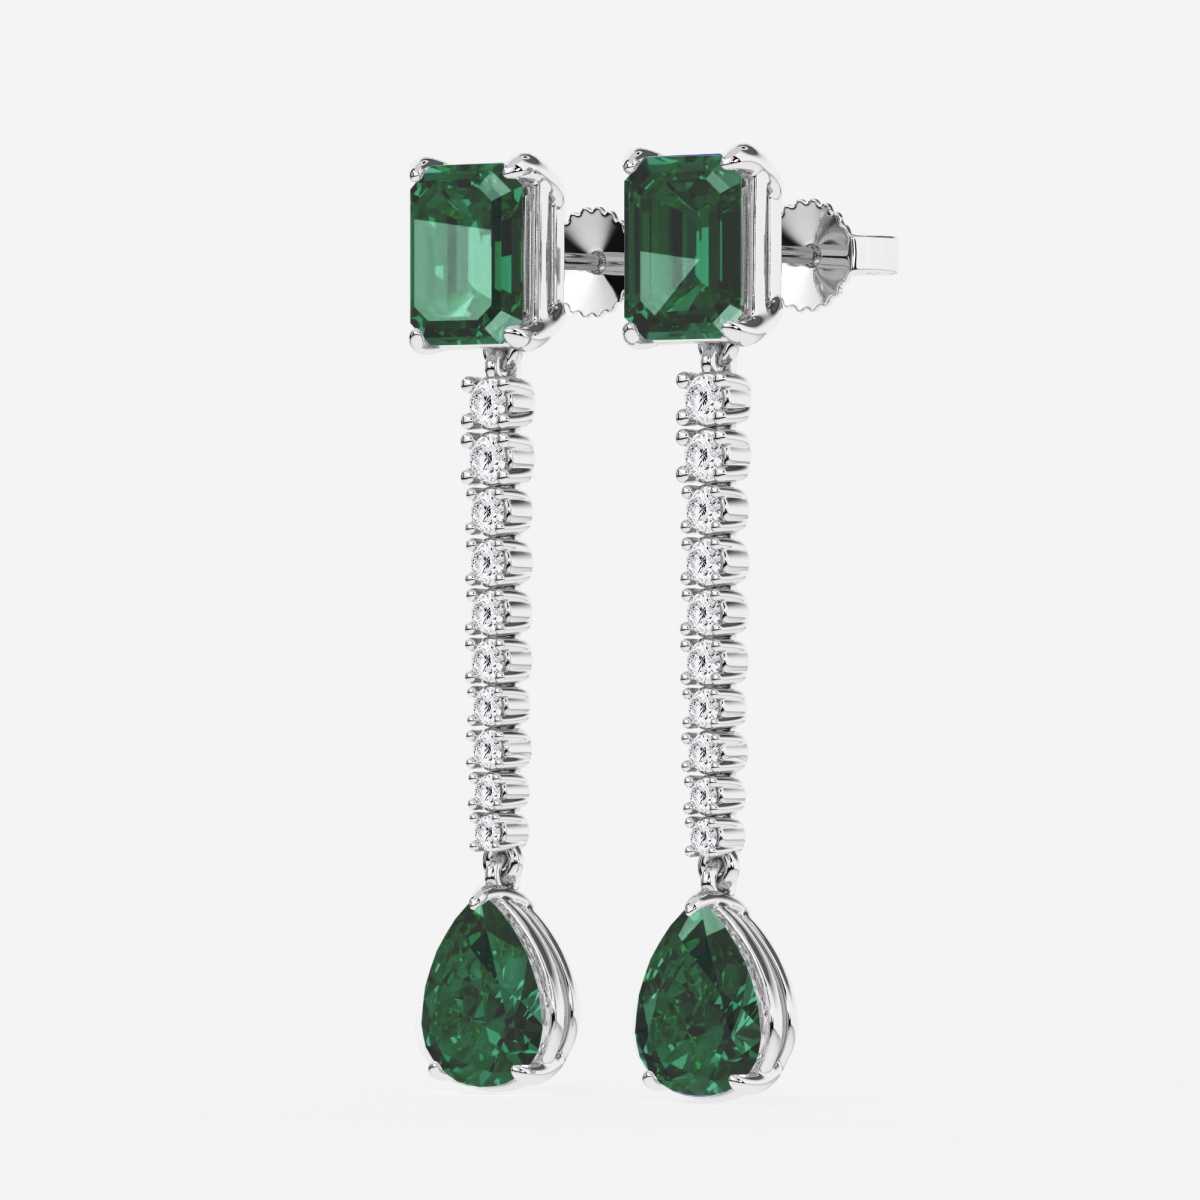 Additional Image 1 for  9X7mm Emerald Cut, 10x8mm Pear Cut Created Emerald and 3/4 ctw Round Lab Grown Diamond Linear Earrings